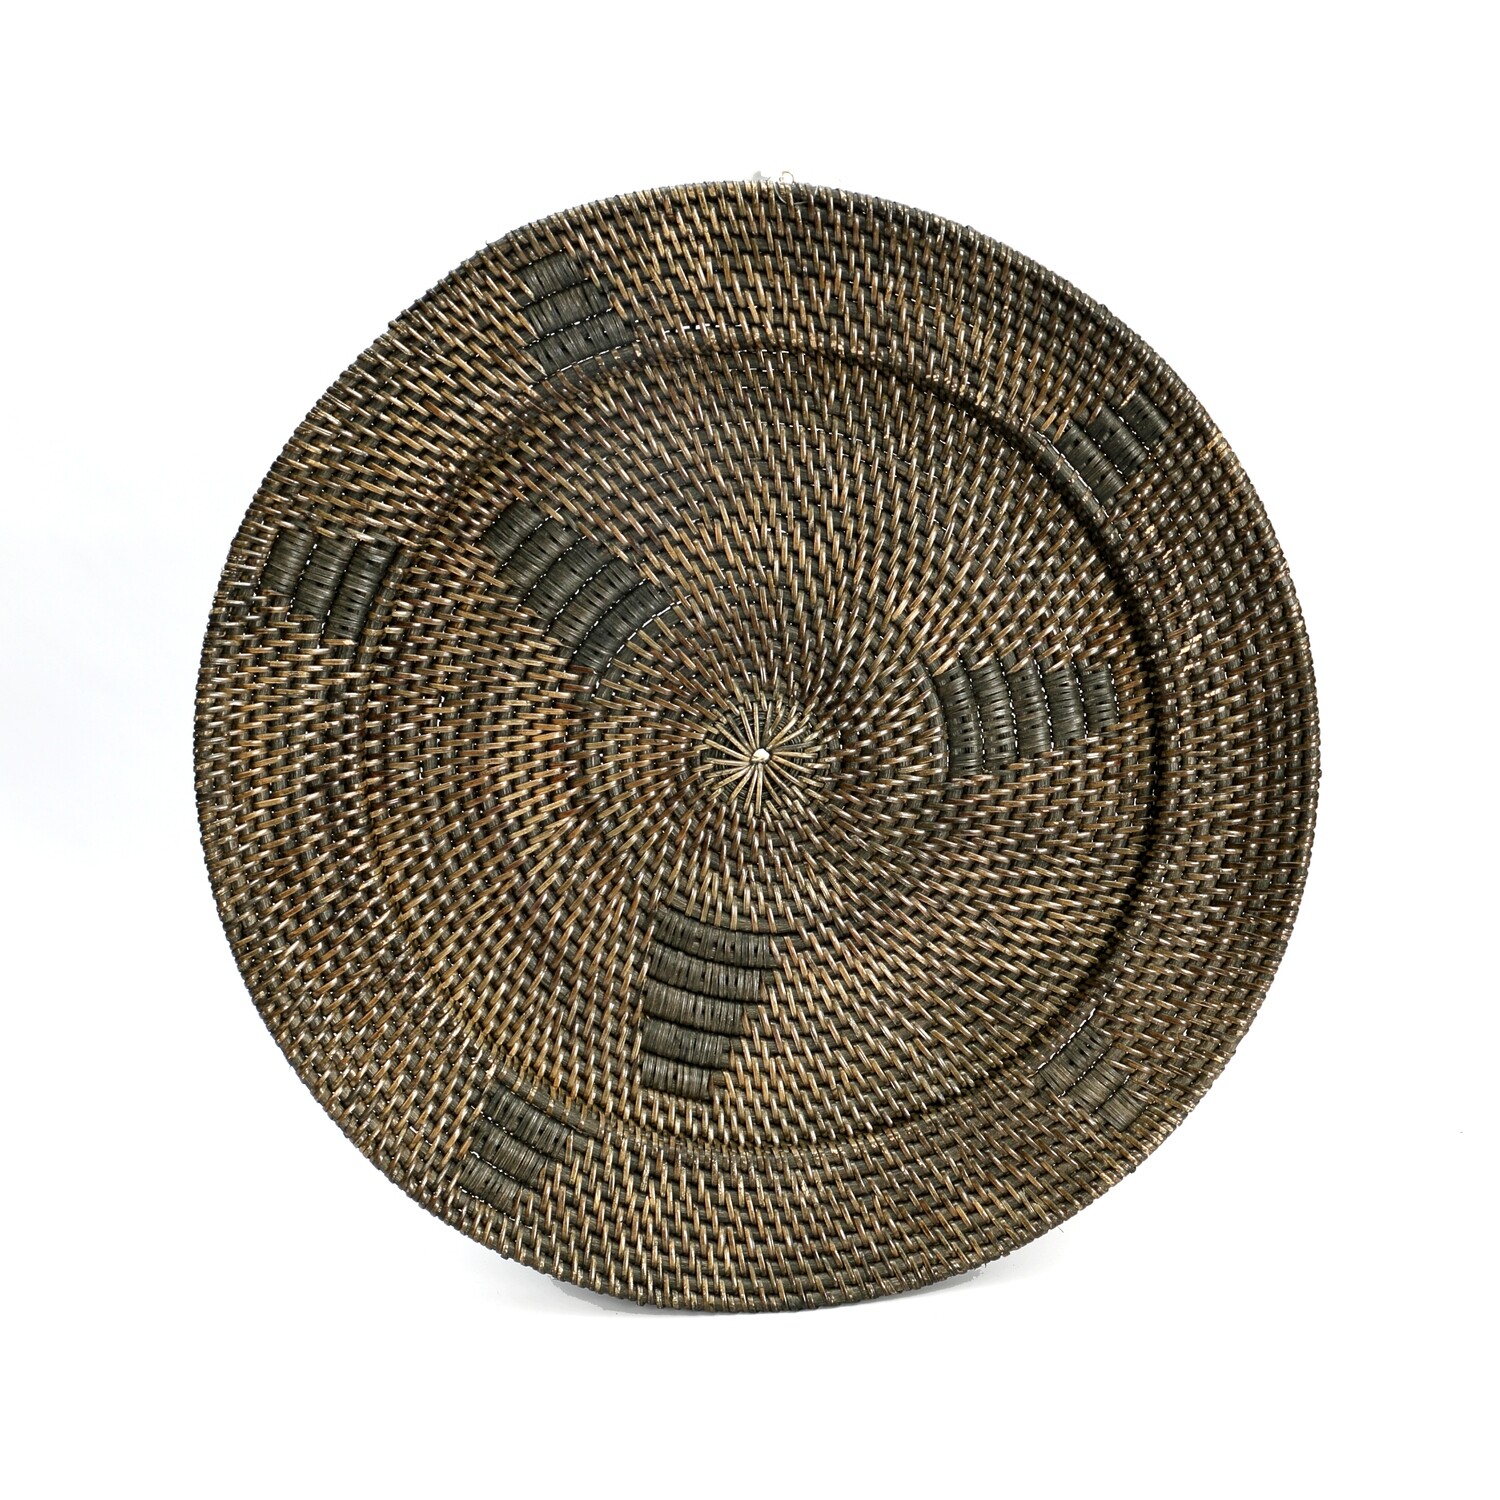 THE RATTAN PLATE BROWN-M DECORATION